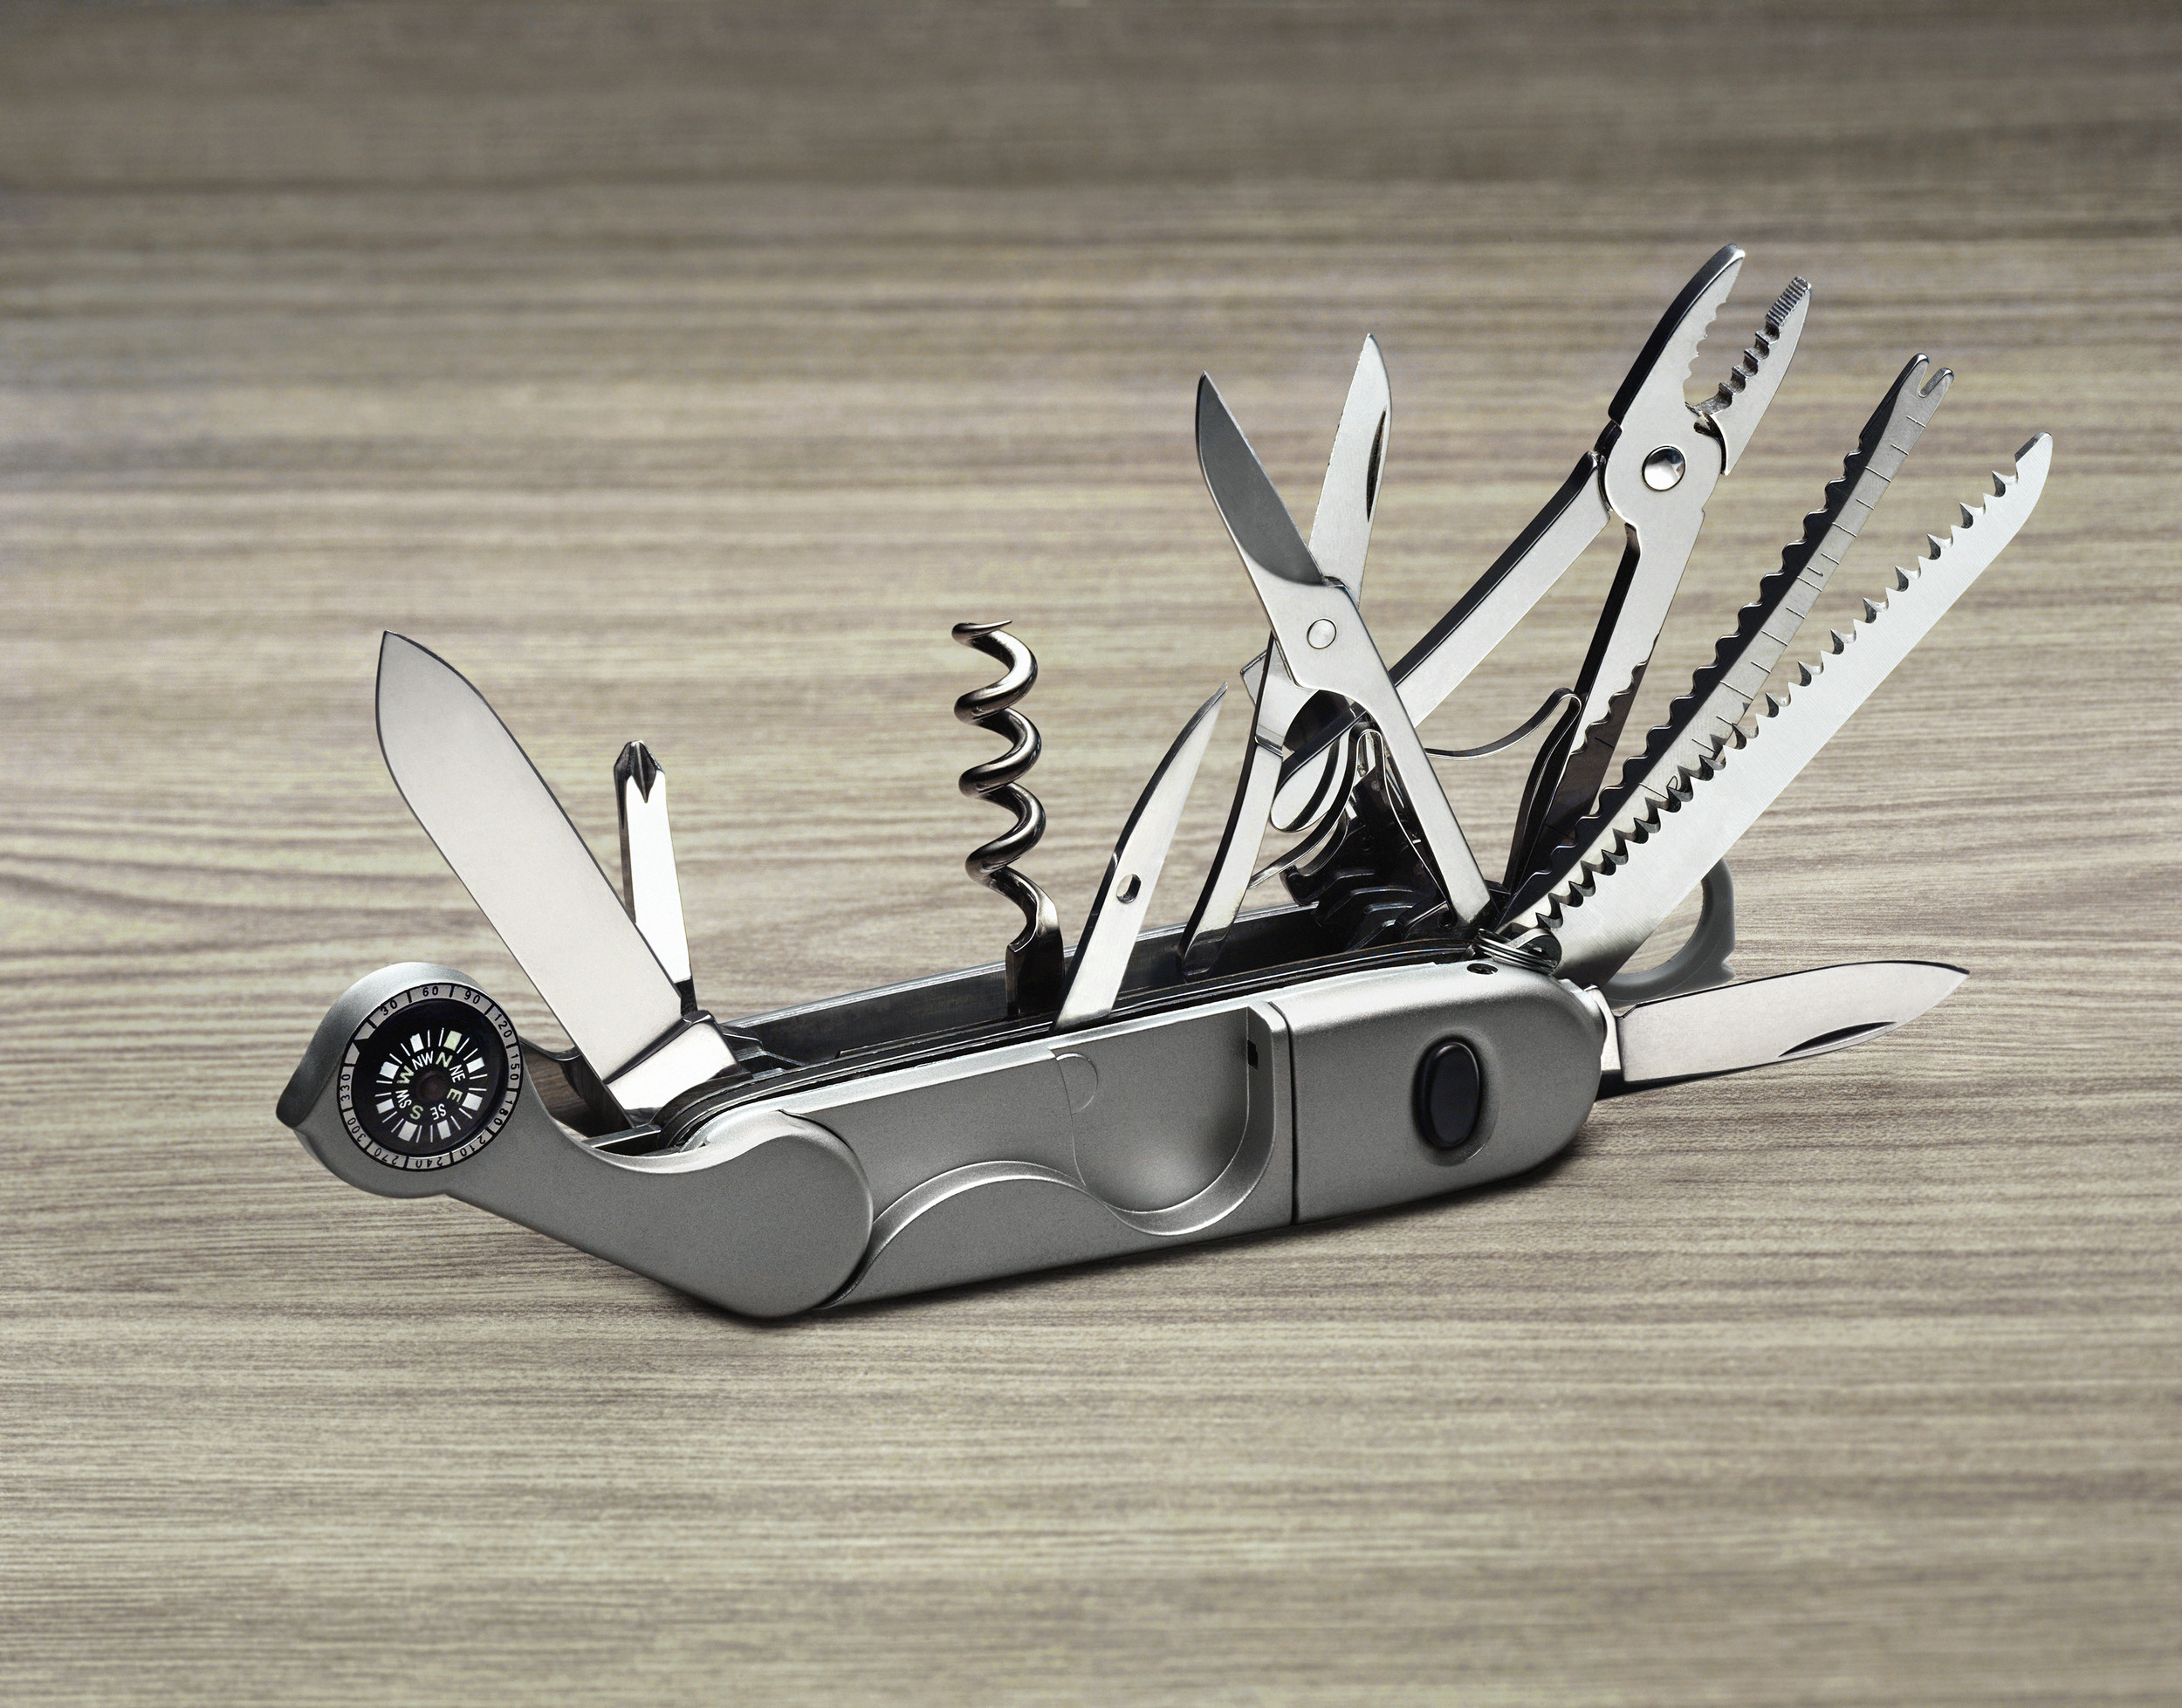 The Swiss Army Knife For Every Level Up